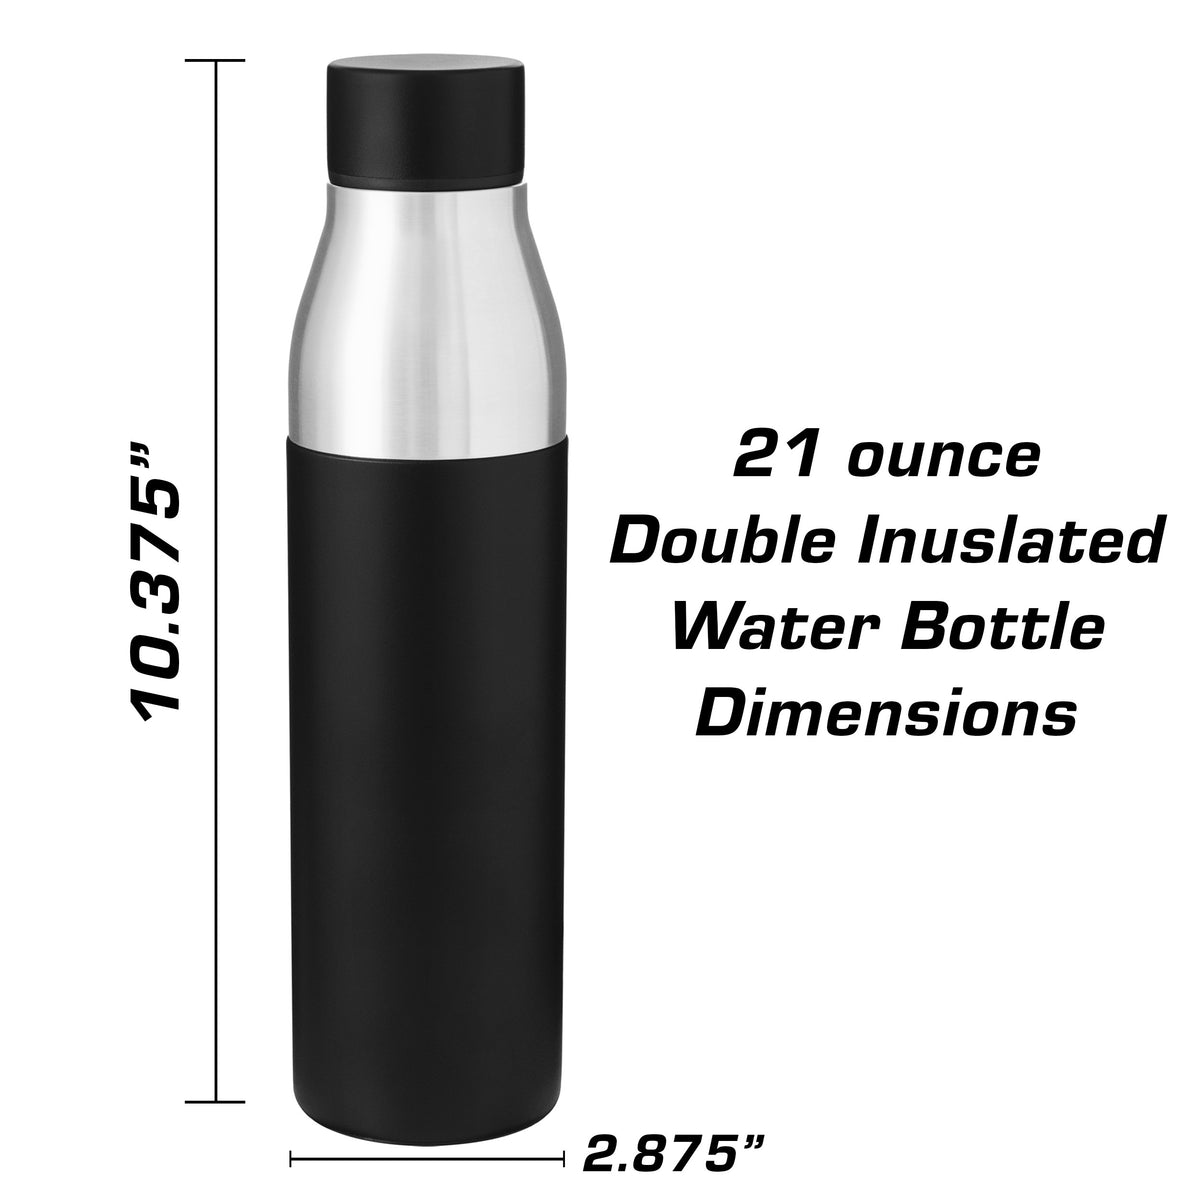 Ford F-150 Raptor 2021 Side Profile Insulated Stainless Steel Water Bottle - 21 oz